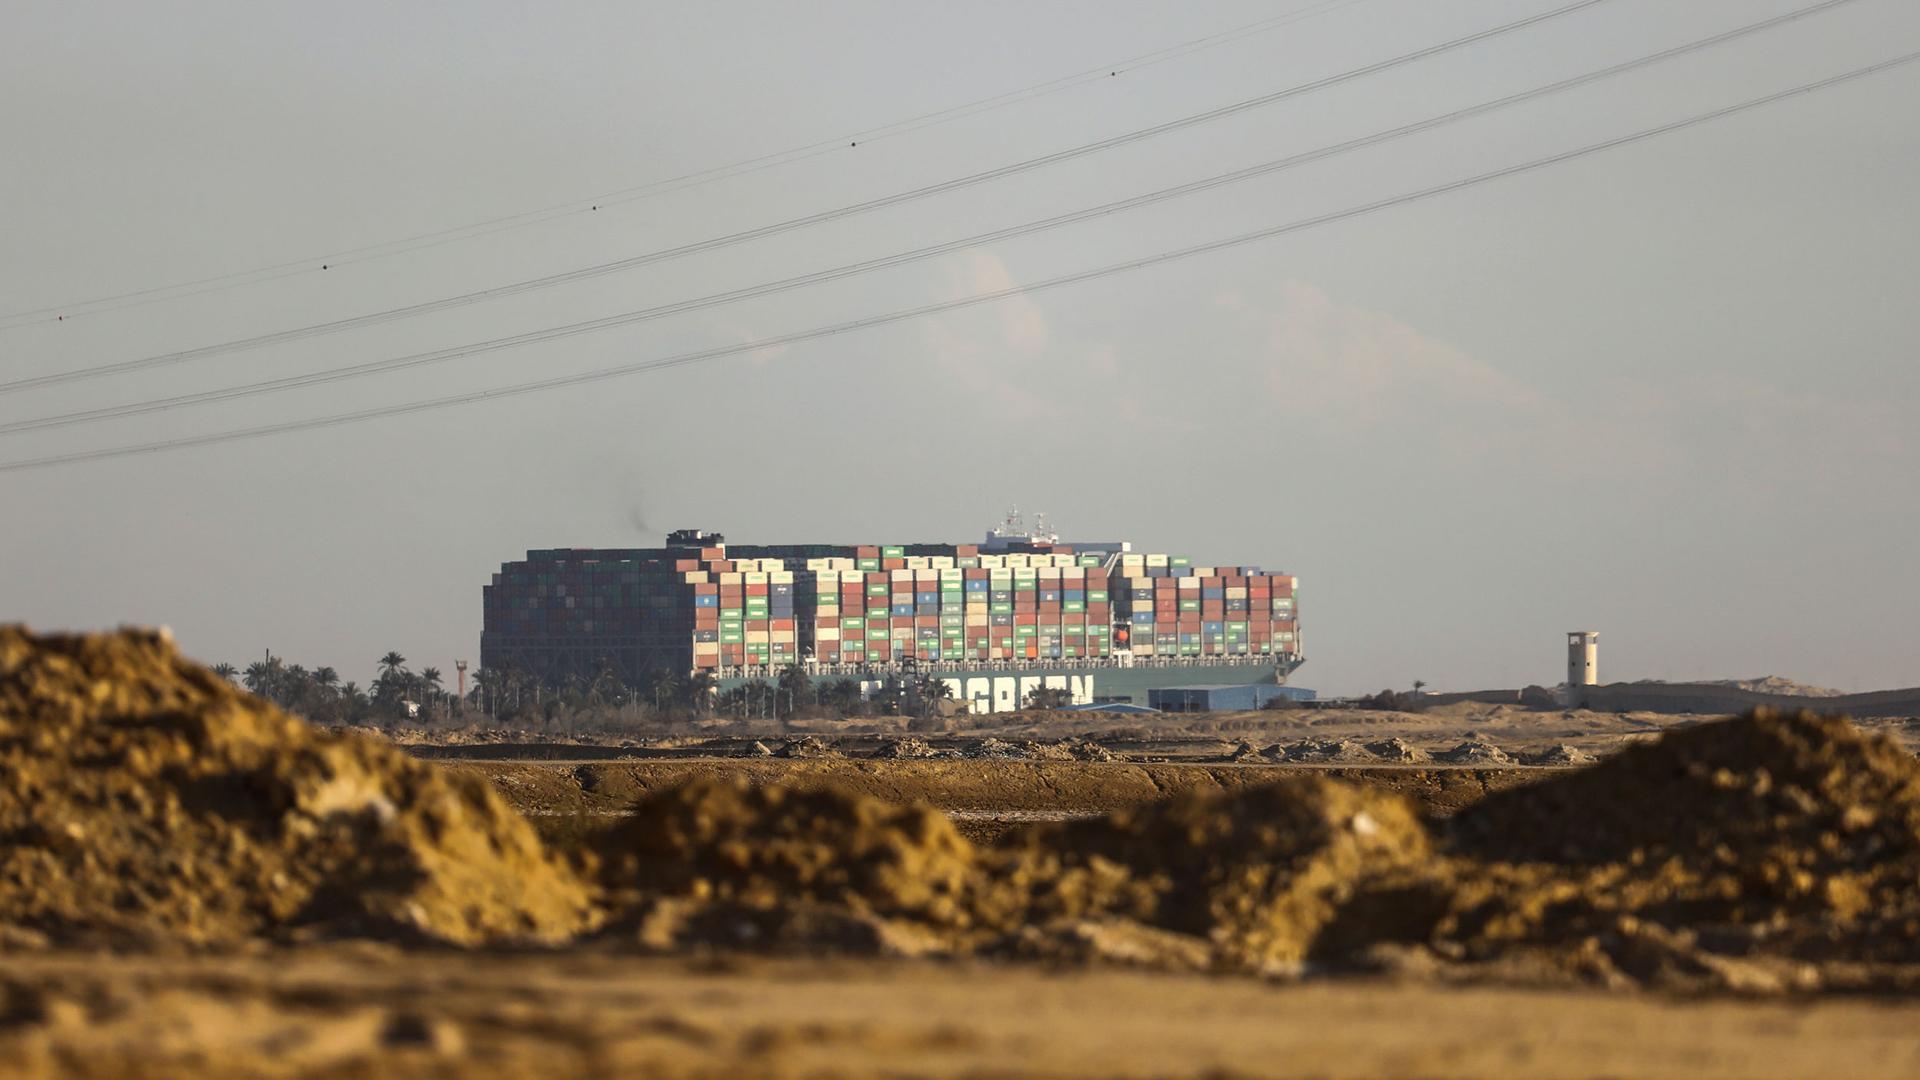 A large cargo ship is show in the distance towering over the sandy landscape with hundreds of containers stacked on top.